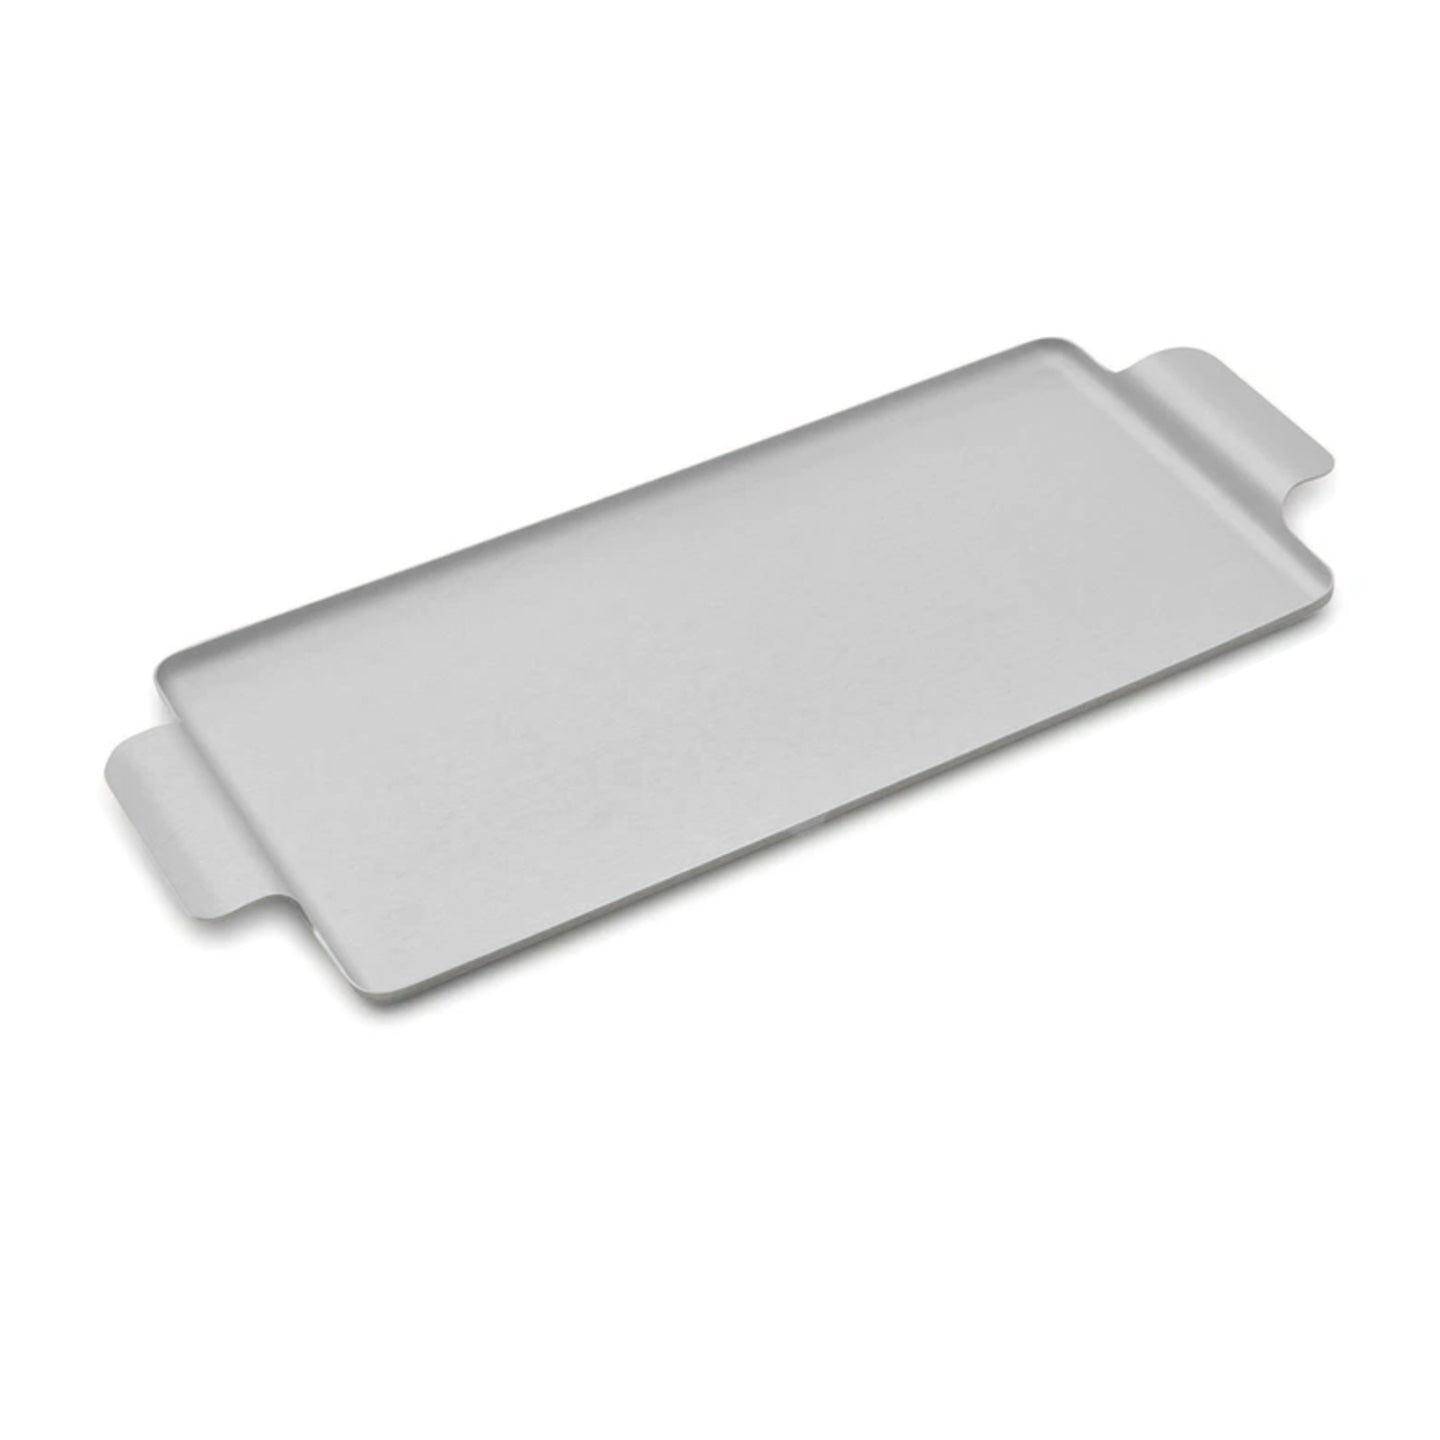 Kaymet Serving Tray Rectangle Silver